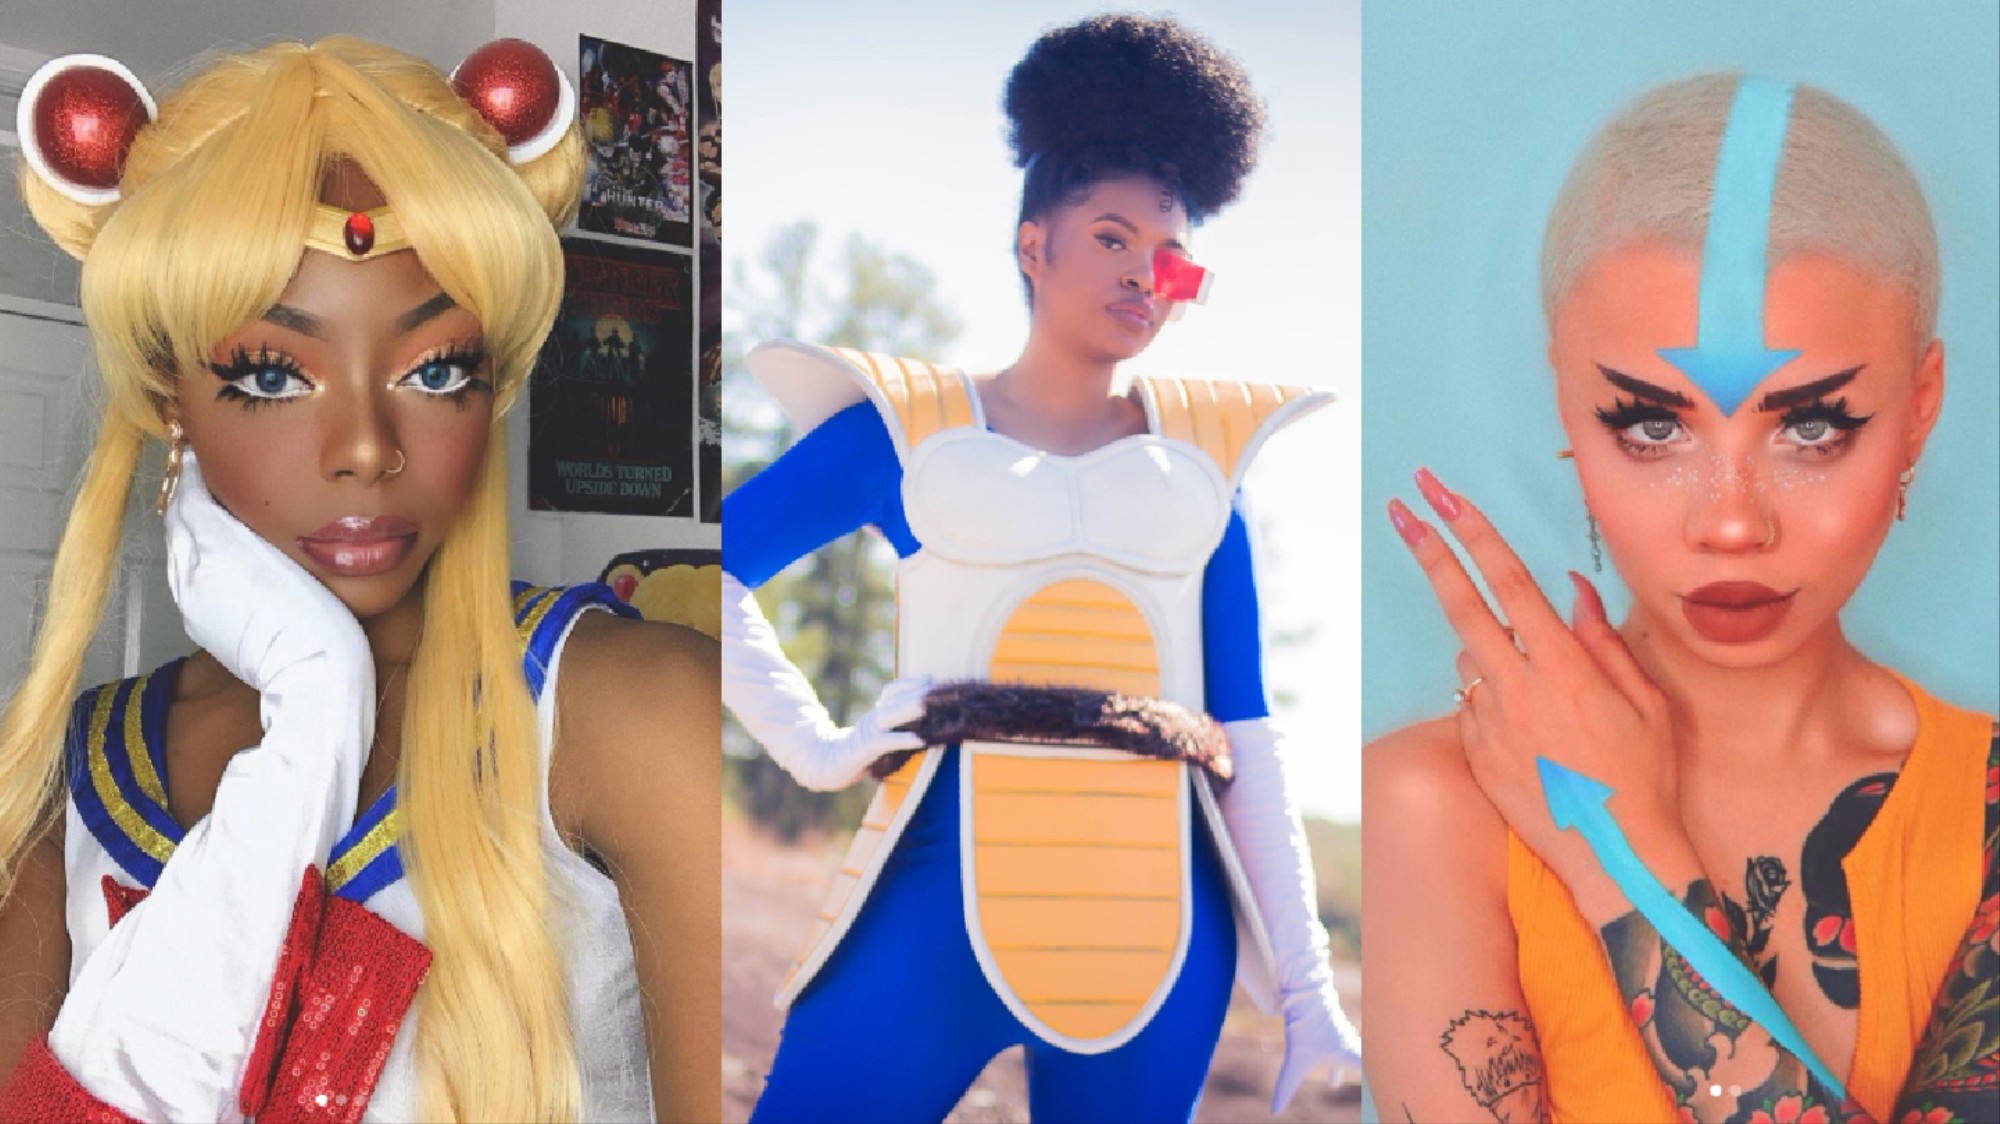 Ebony Cosplay Xxx - Meet the Black Anime Cosplayers Blowing Up on Instagram - VICE